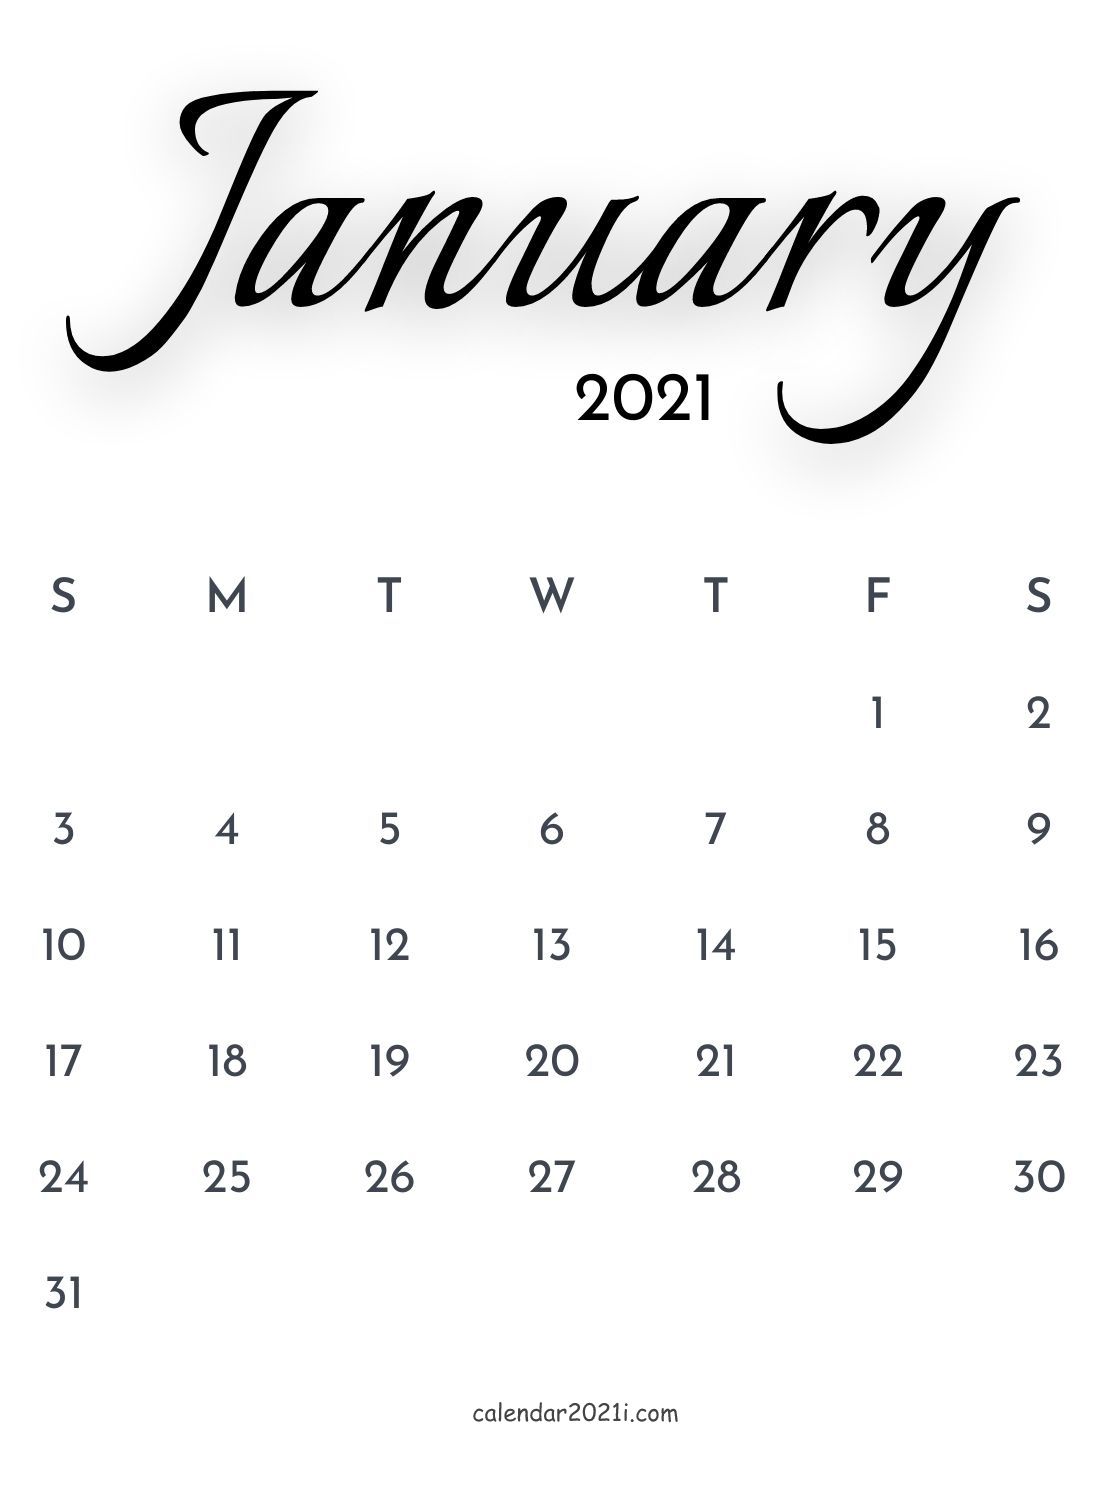 January 2021 Calendar Printable Wallpaper Floral Holidays And More 9990